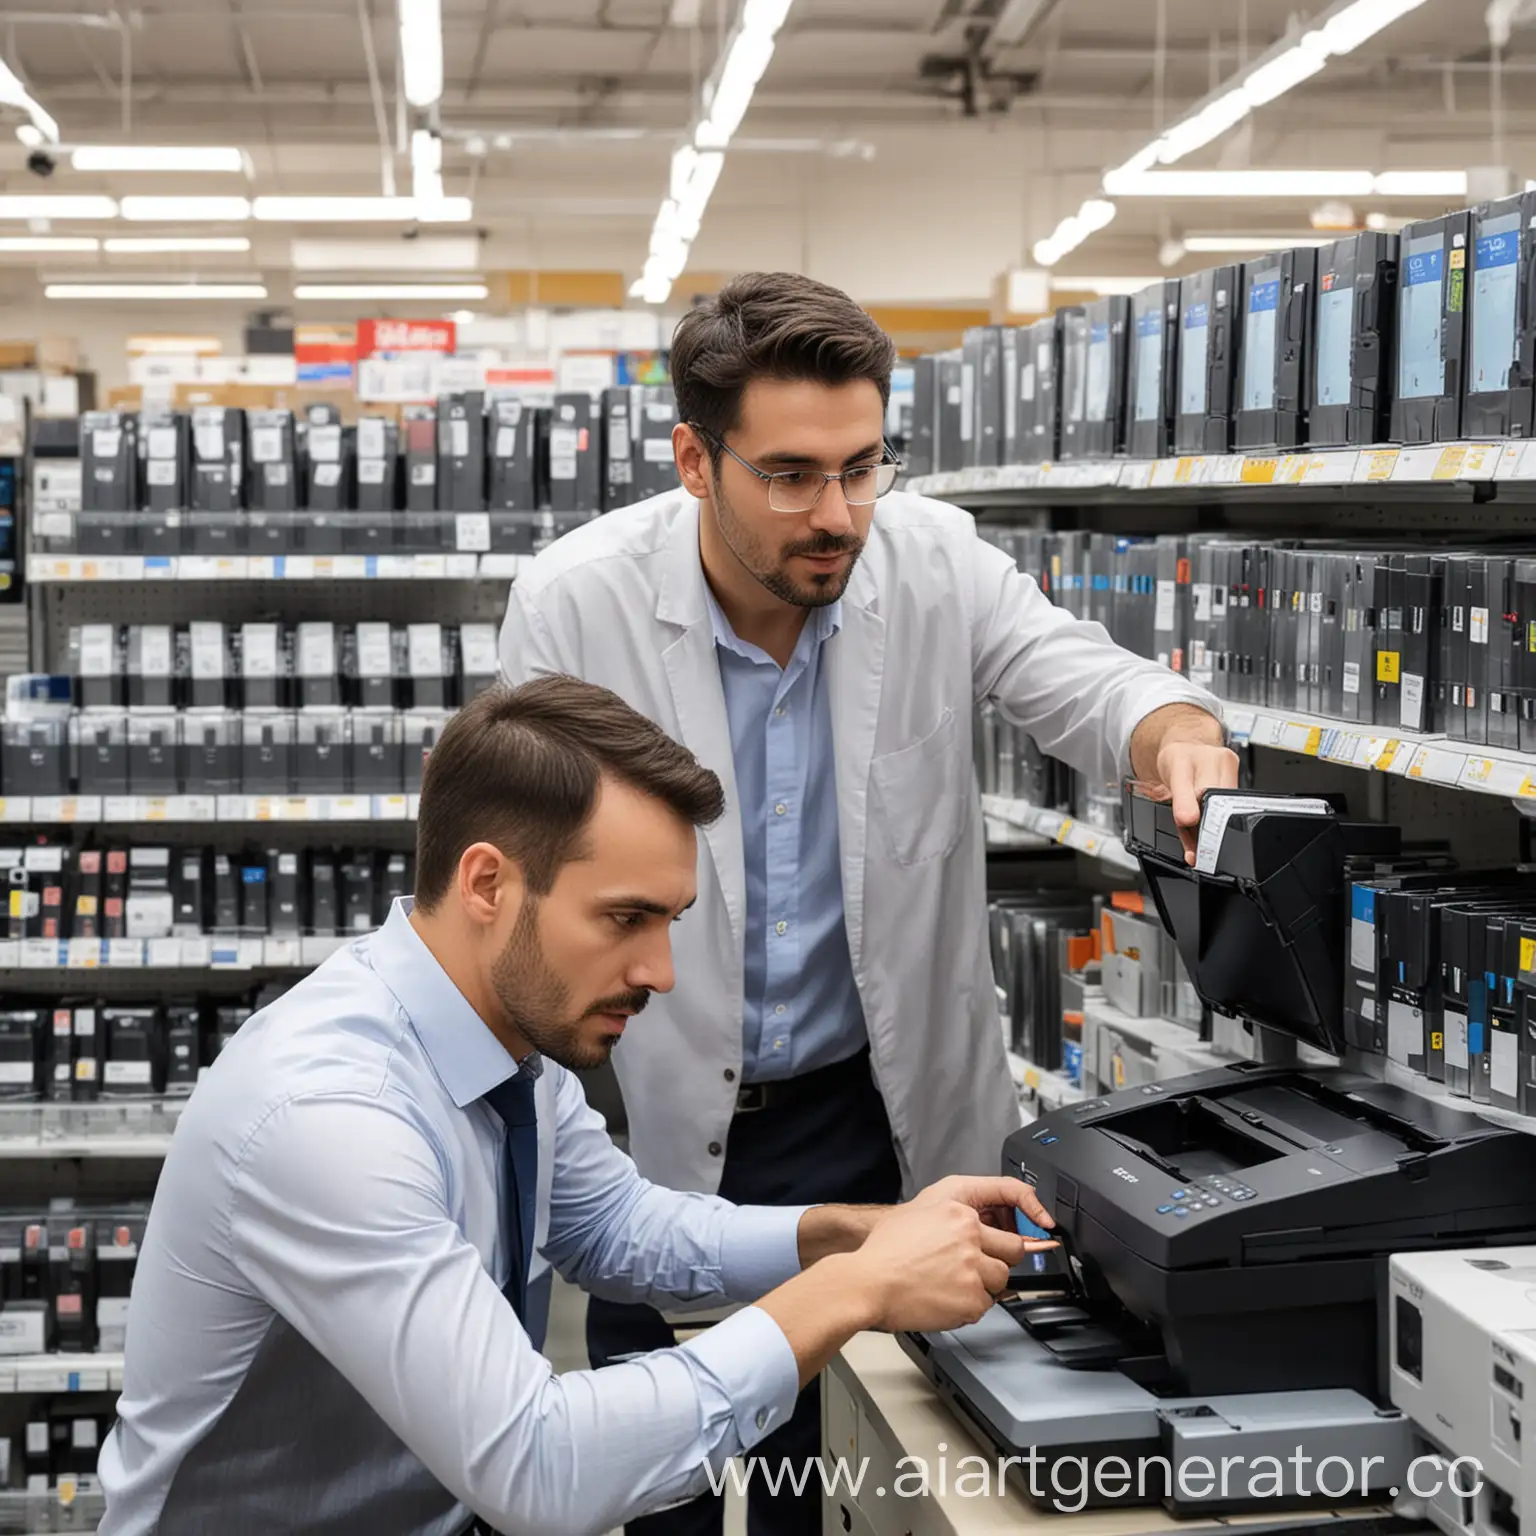 The man came to the computer hardware store and the salesman is helping with choosing a printer.